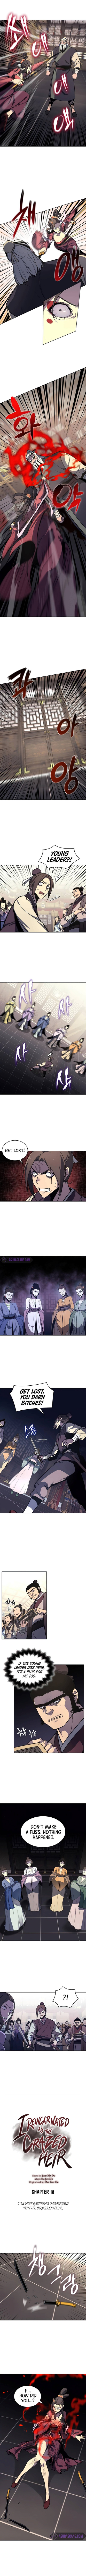 I Reincarnated As The Crazed Heir Chapter 18 - Page 1